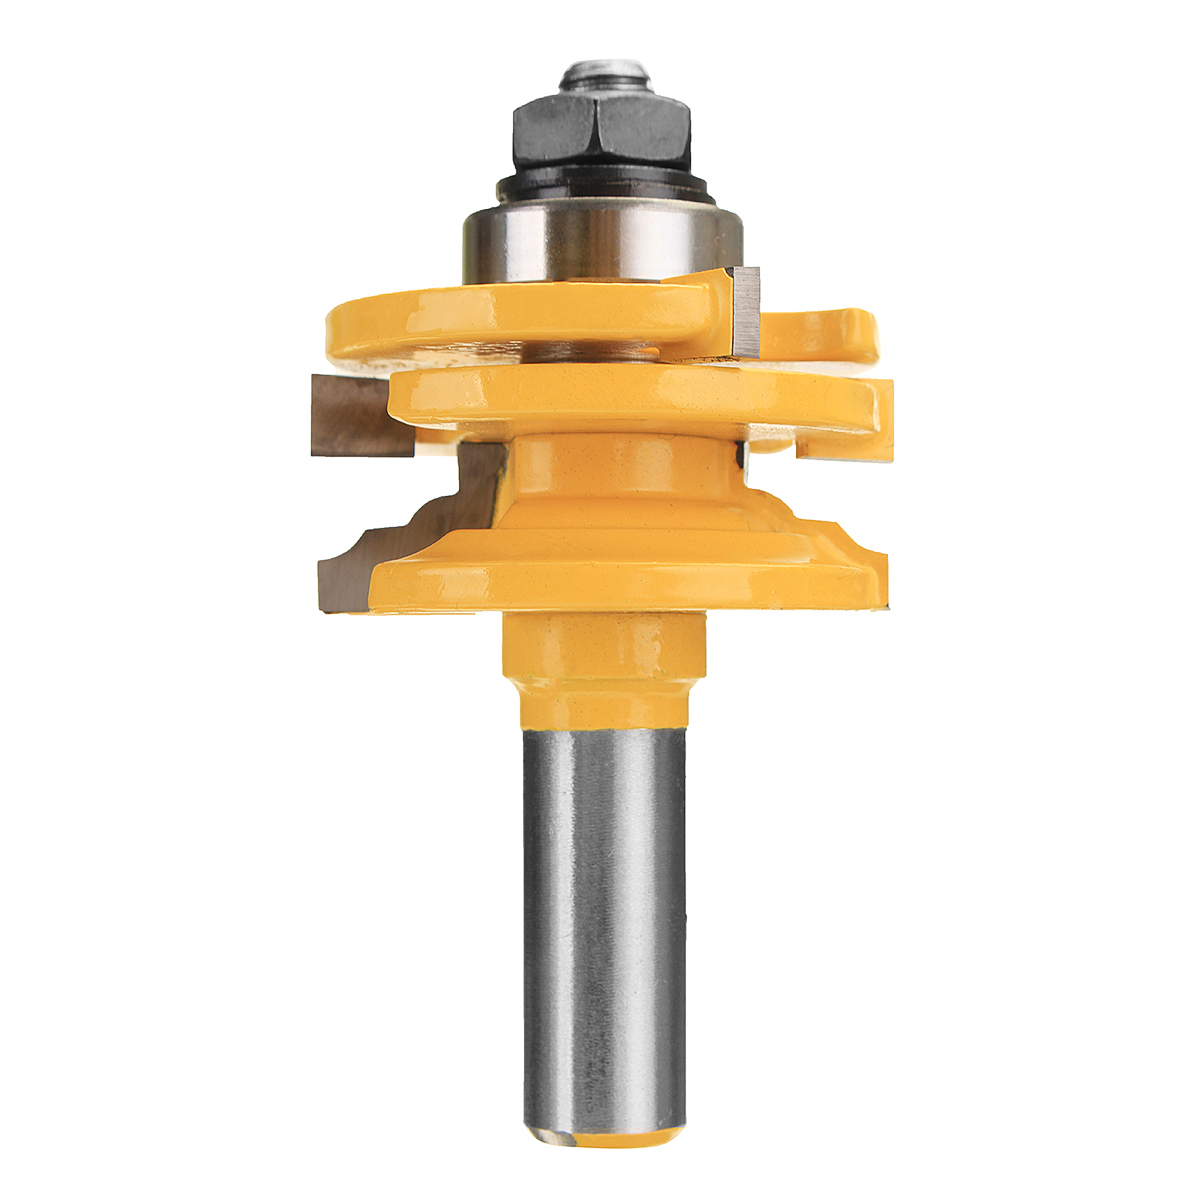 

1/2 Inch Shank Reversible Rail and Stile Router Bit Woodworking Cutter